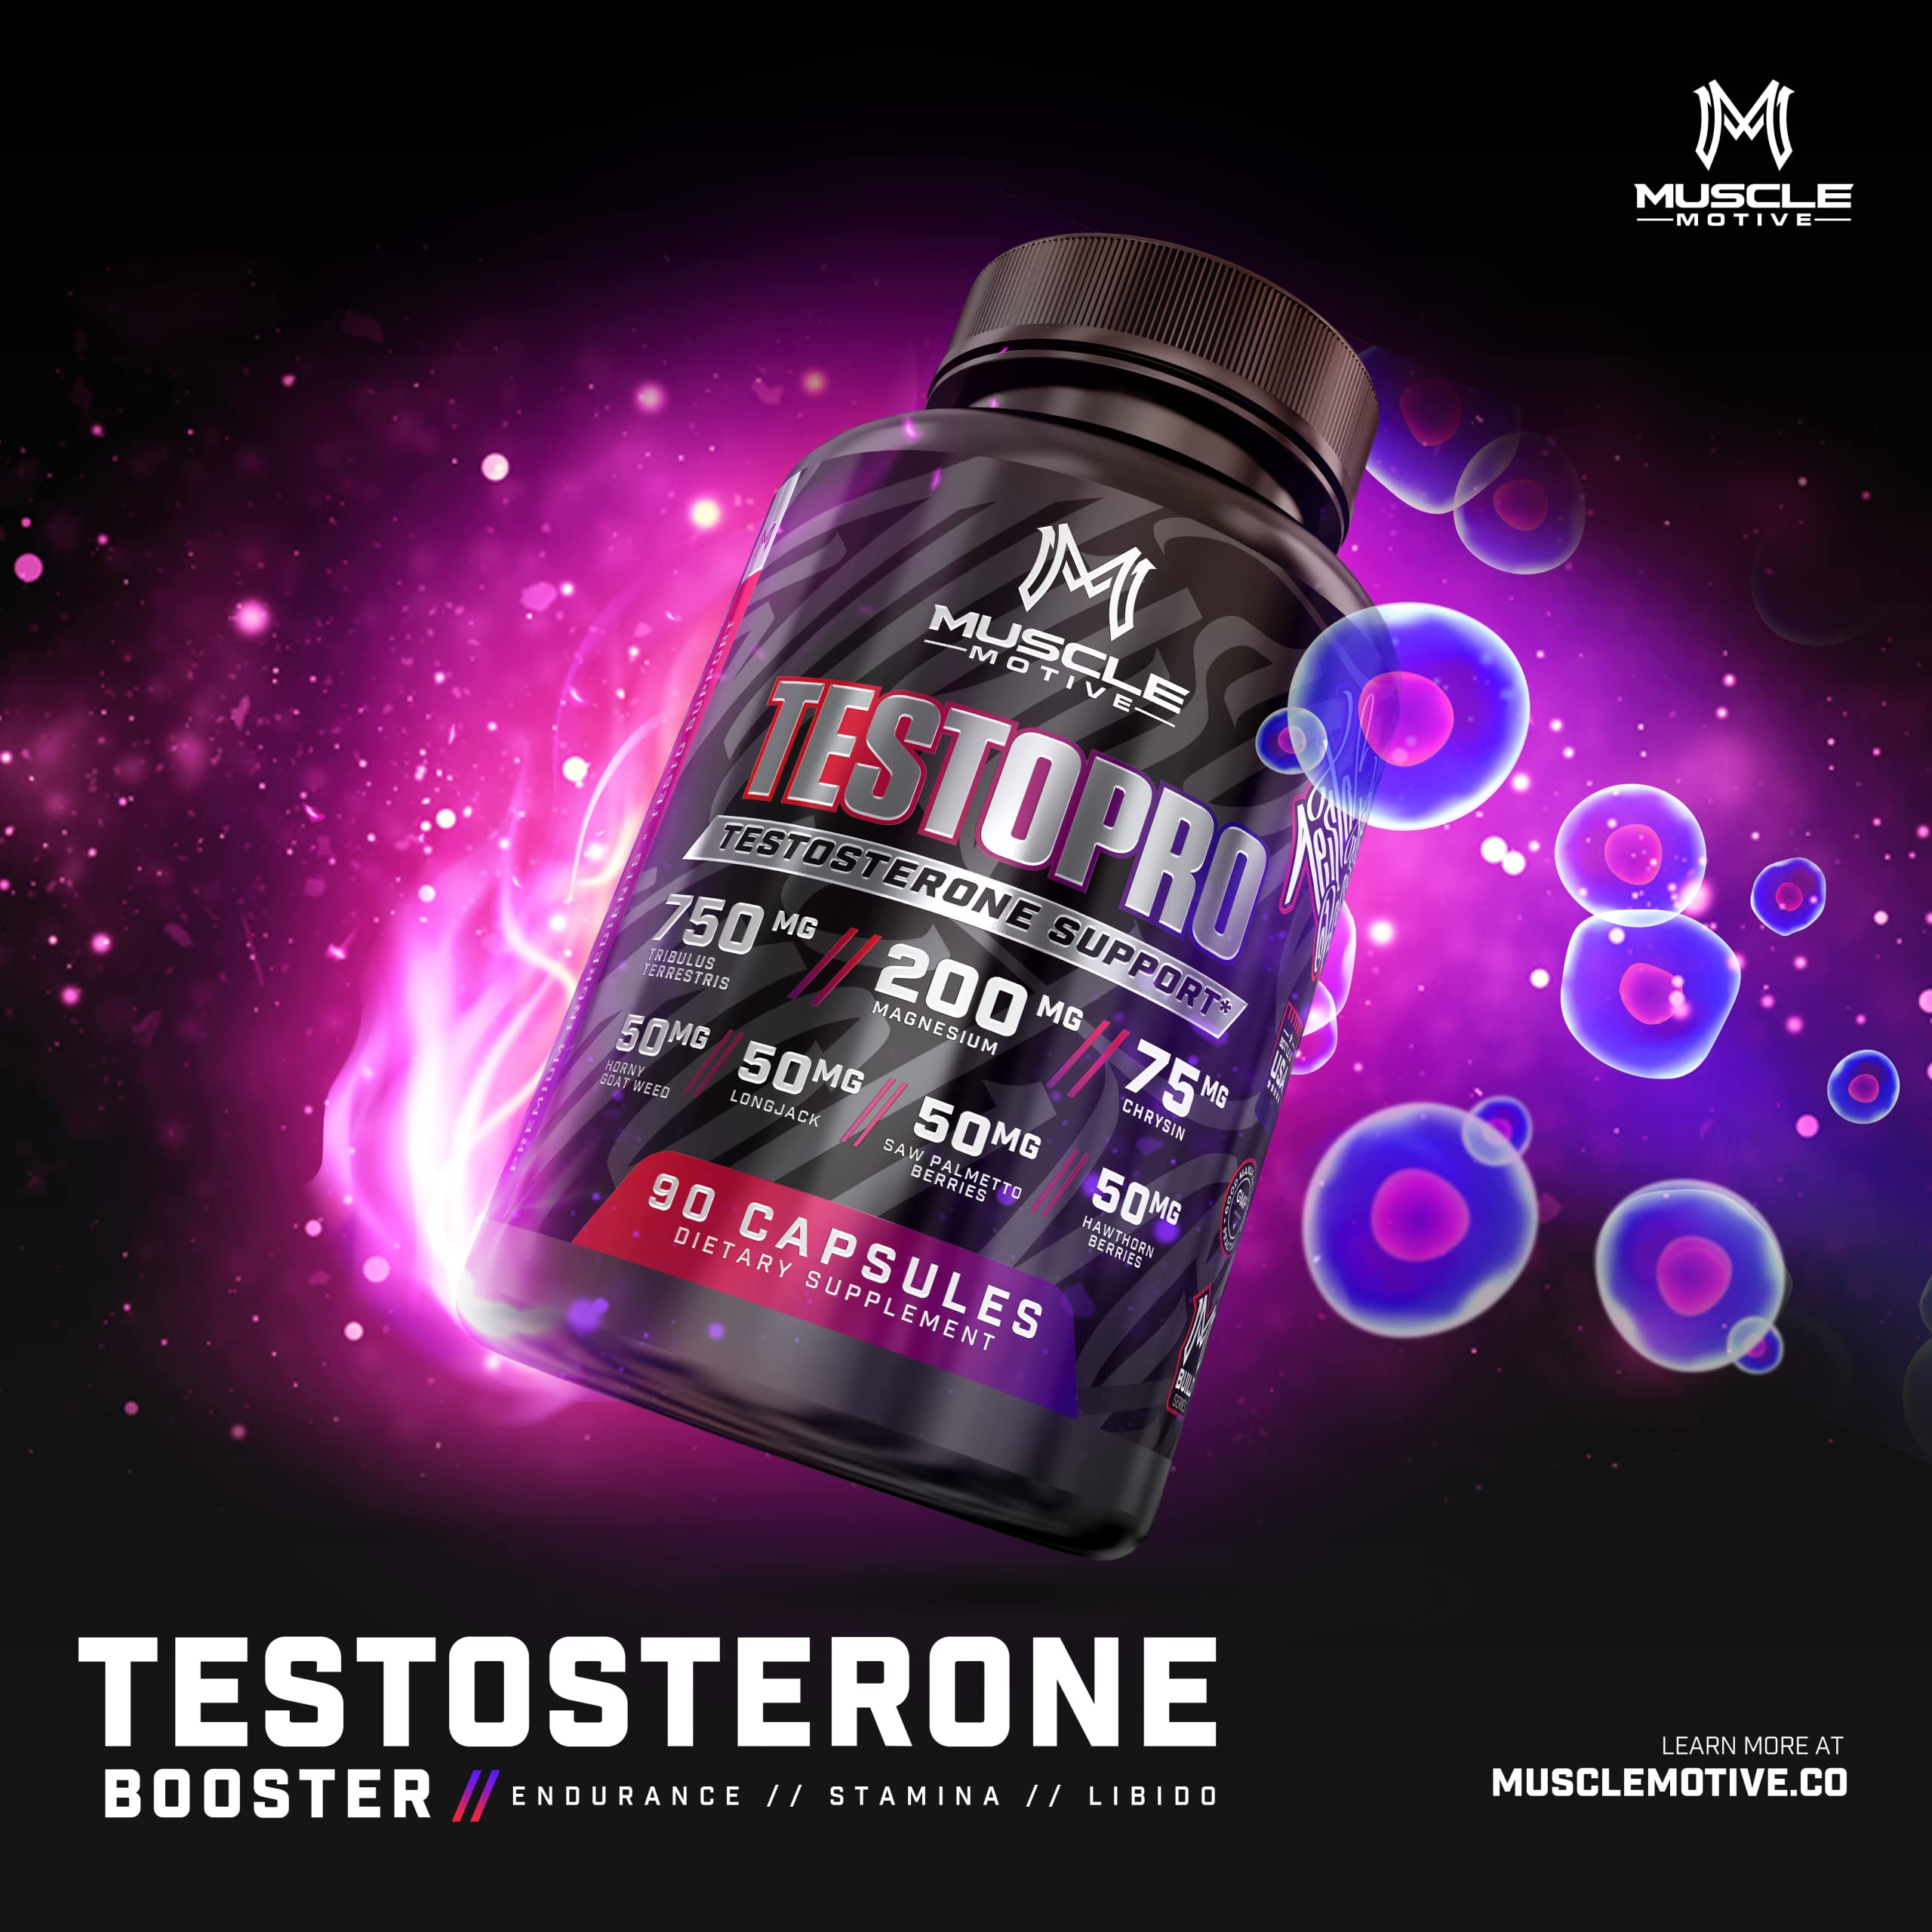 Testosterone Booster for Men – Max Strength Tribulus, Horny Goat Weed, Saw Palmetto, Longjack Tongkat Ali - Boost Stamina, Strength, Endurance, Energy, Vitality, & Muscle Growth – 90 Capsules